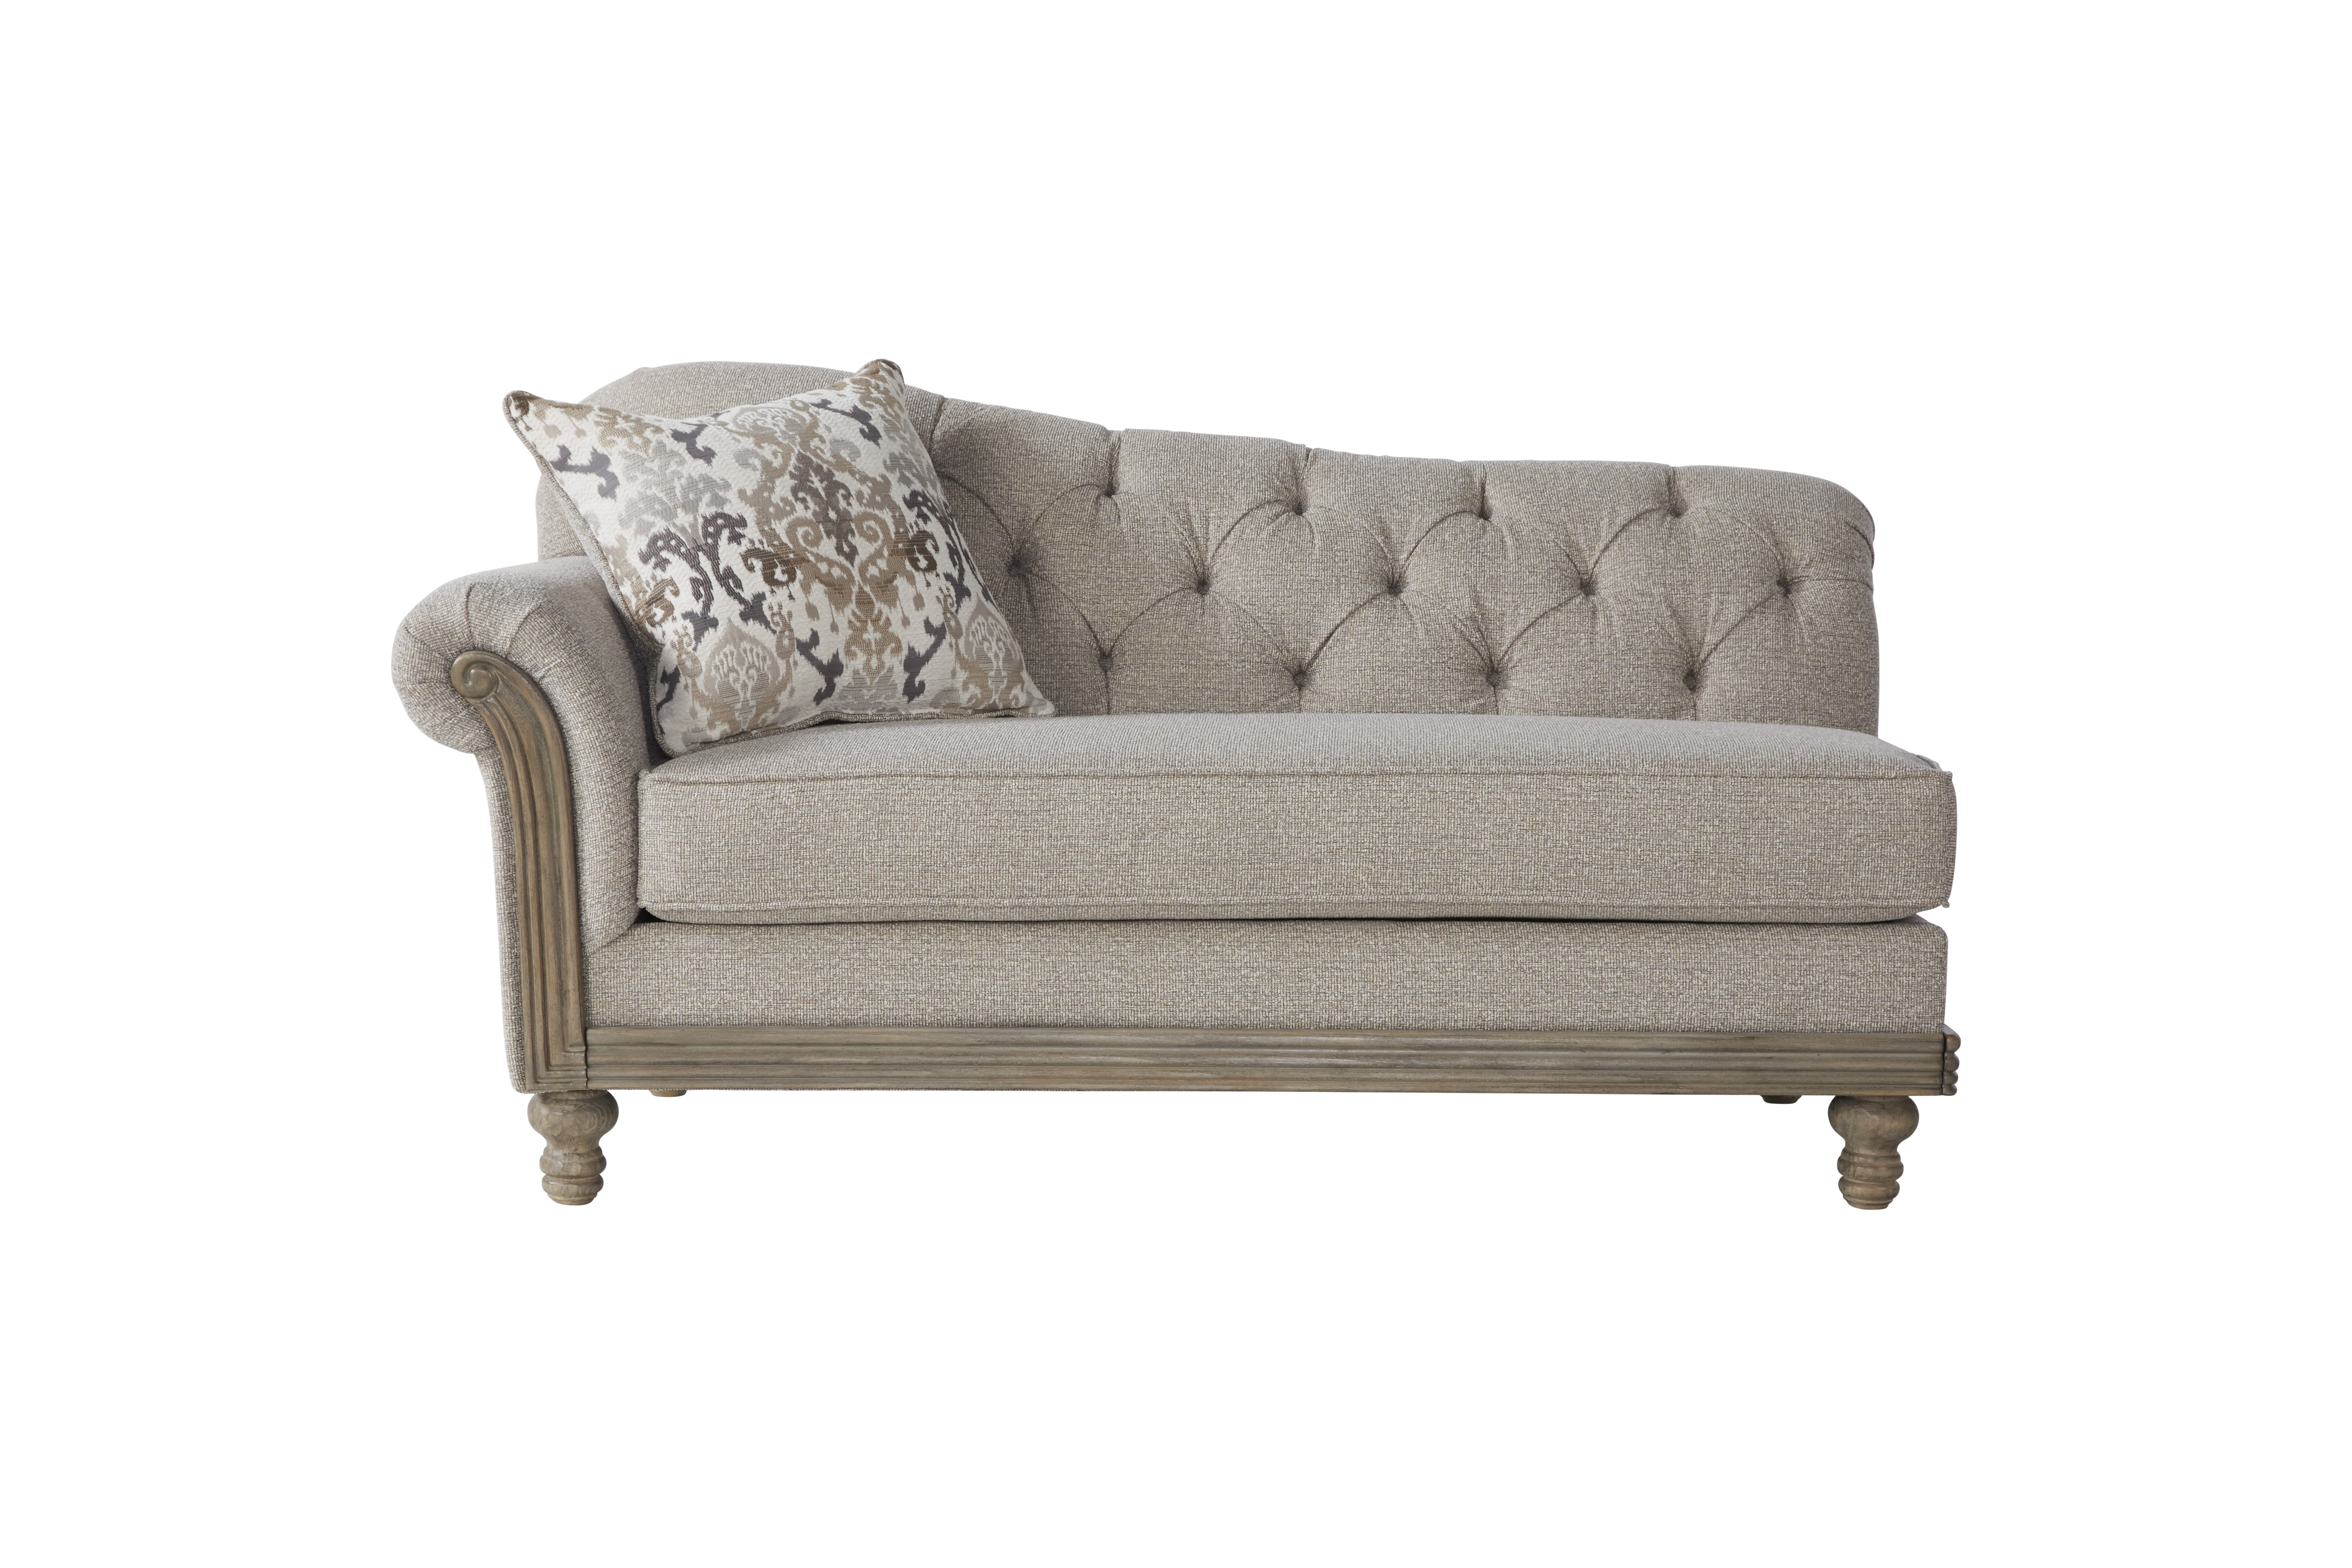 Ogallala Upholstered Chaise Lounge